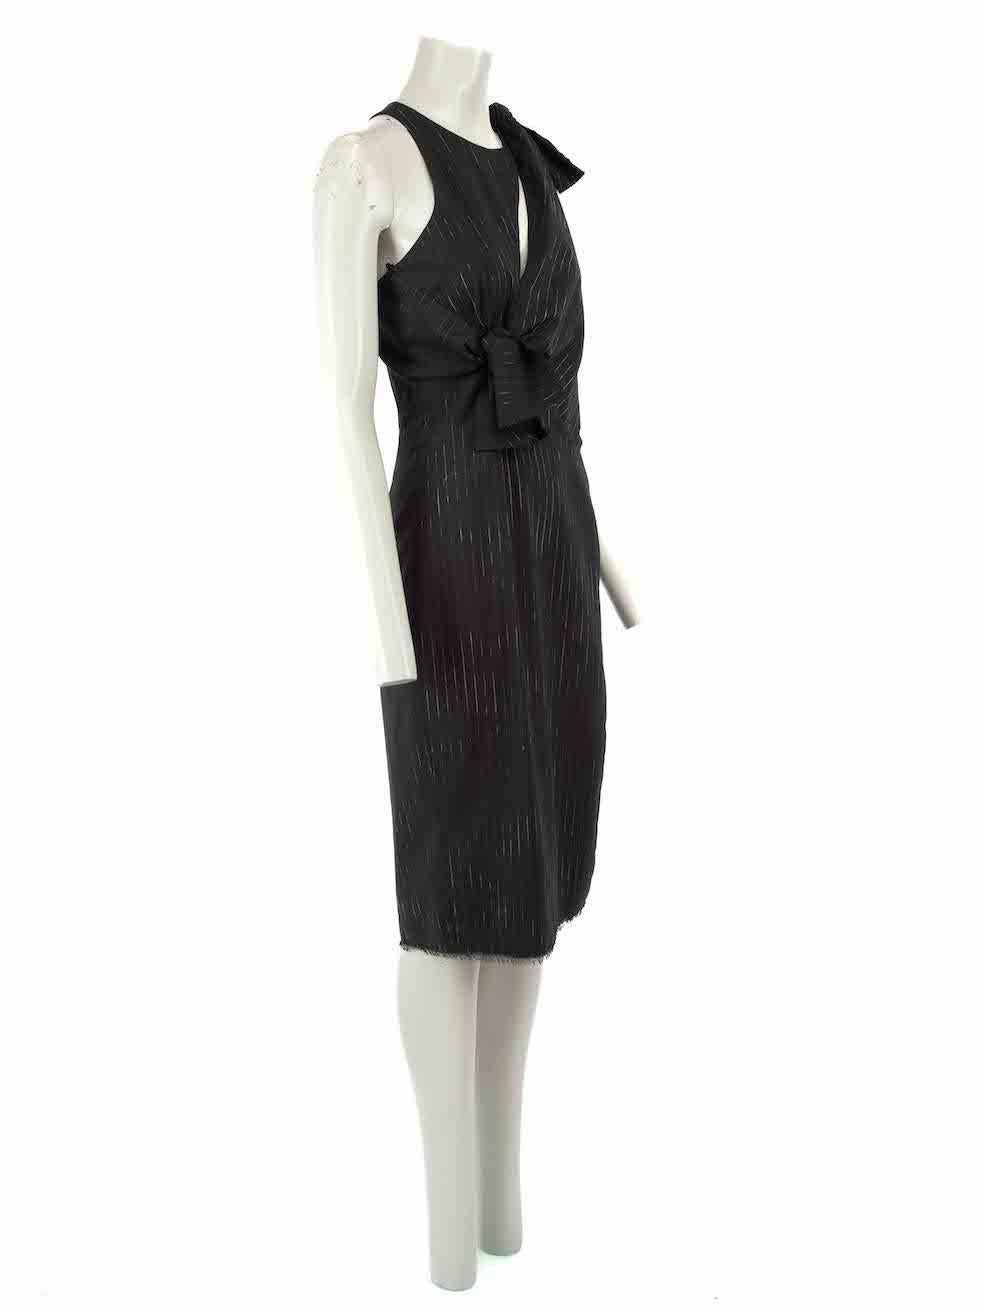 CONDITION is Never worn, with tags. No visible wear to dress is evident on this new Gianni Versace designer resale item.
 
 Details
 Vintage
 Black
 Wool
 Dress
 Pinstripe pattern
 Midi
 Sleeveless
 Cutout detail
 Asymmetric shoulder
 Back zip and